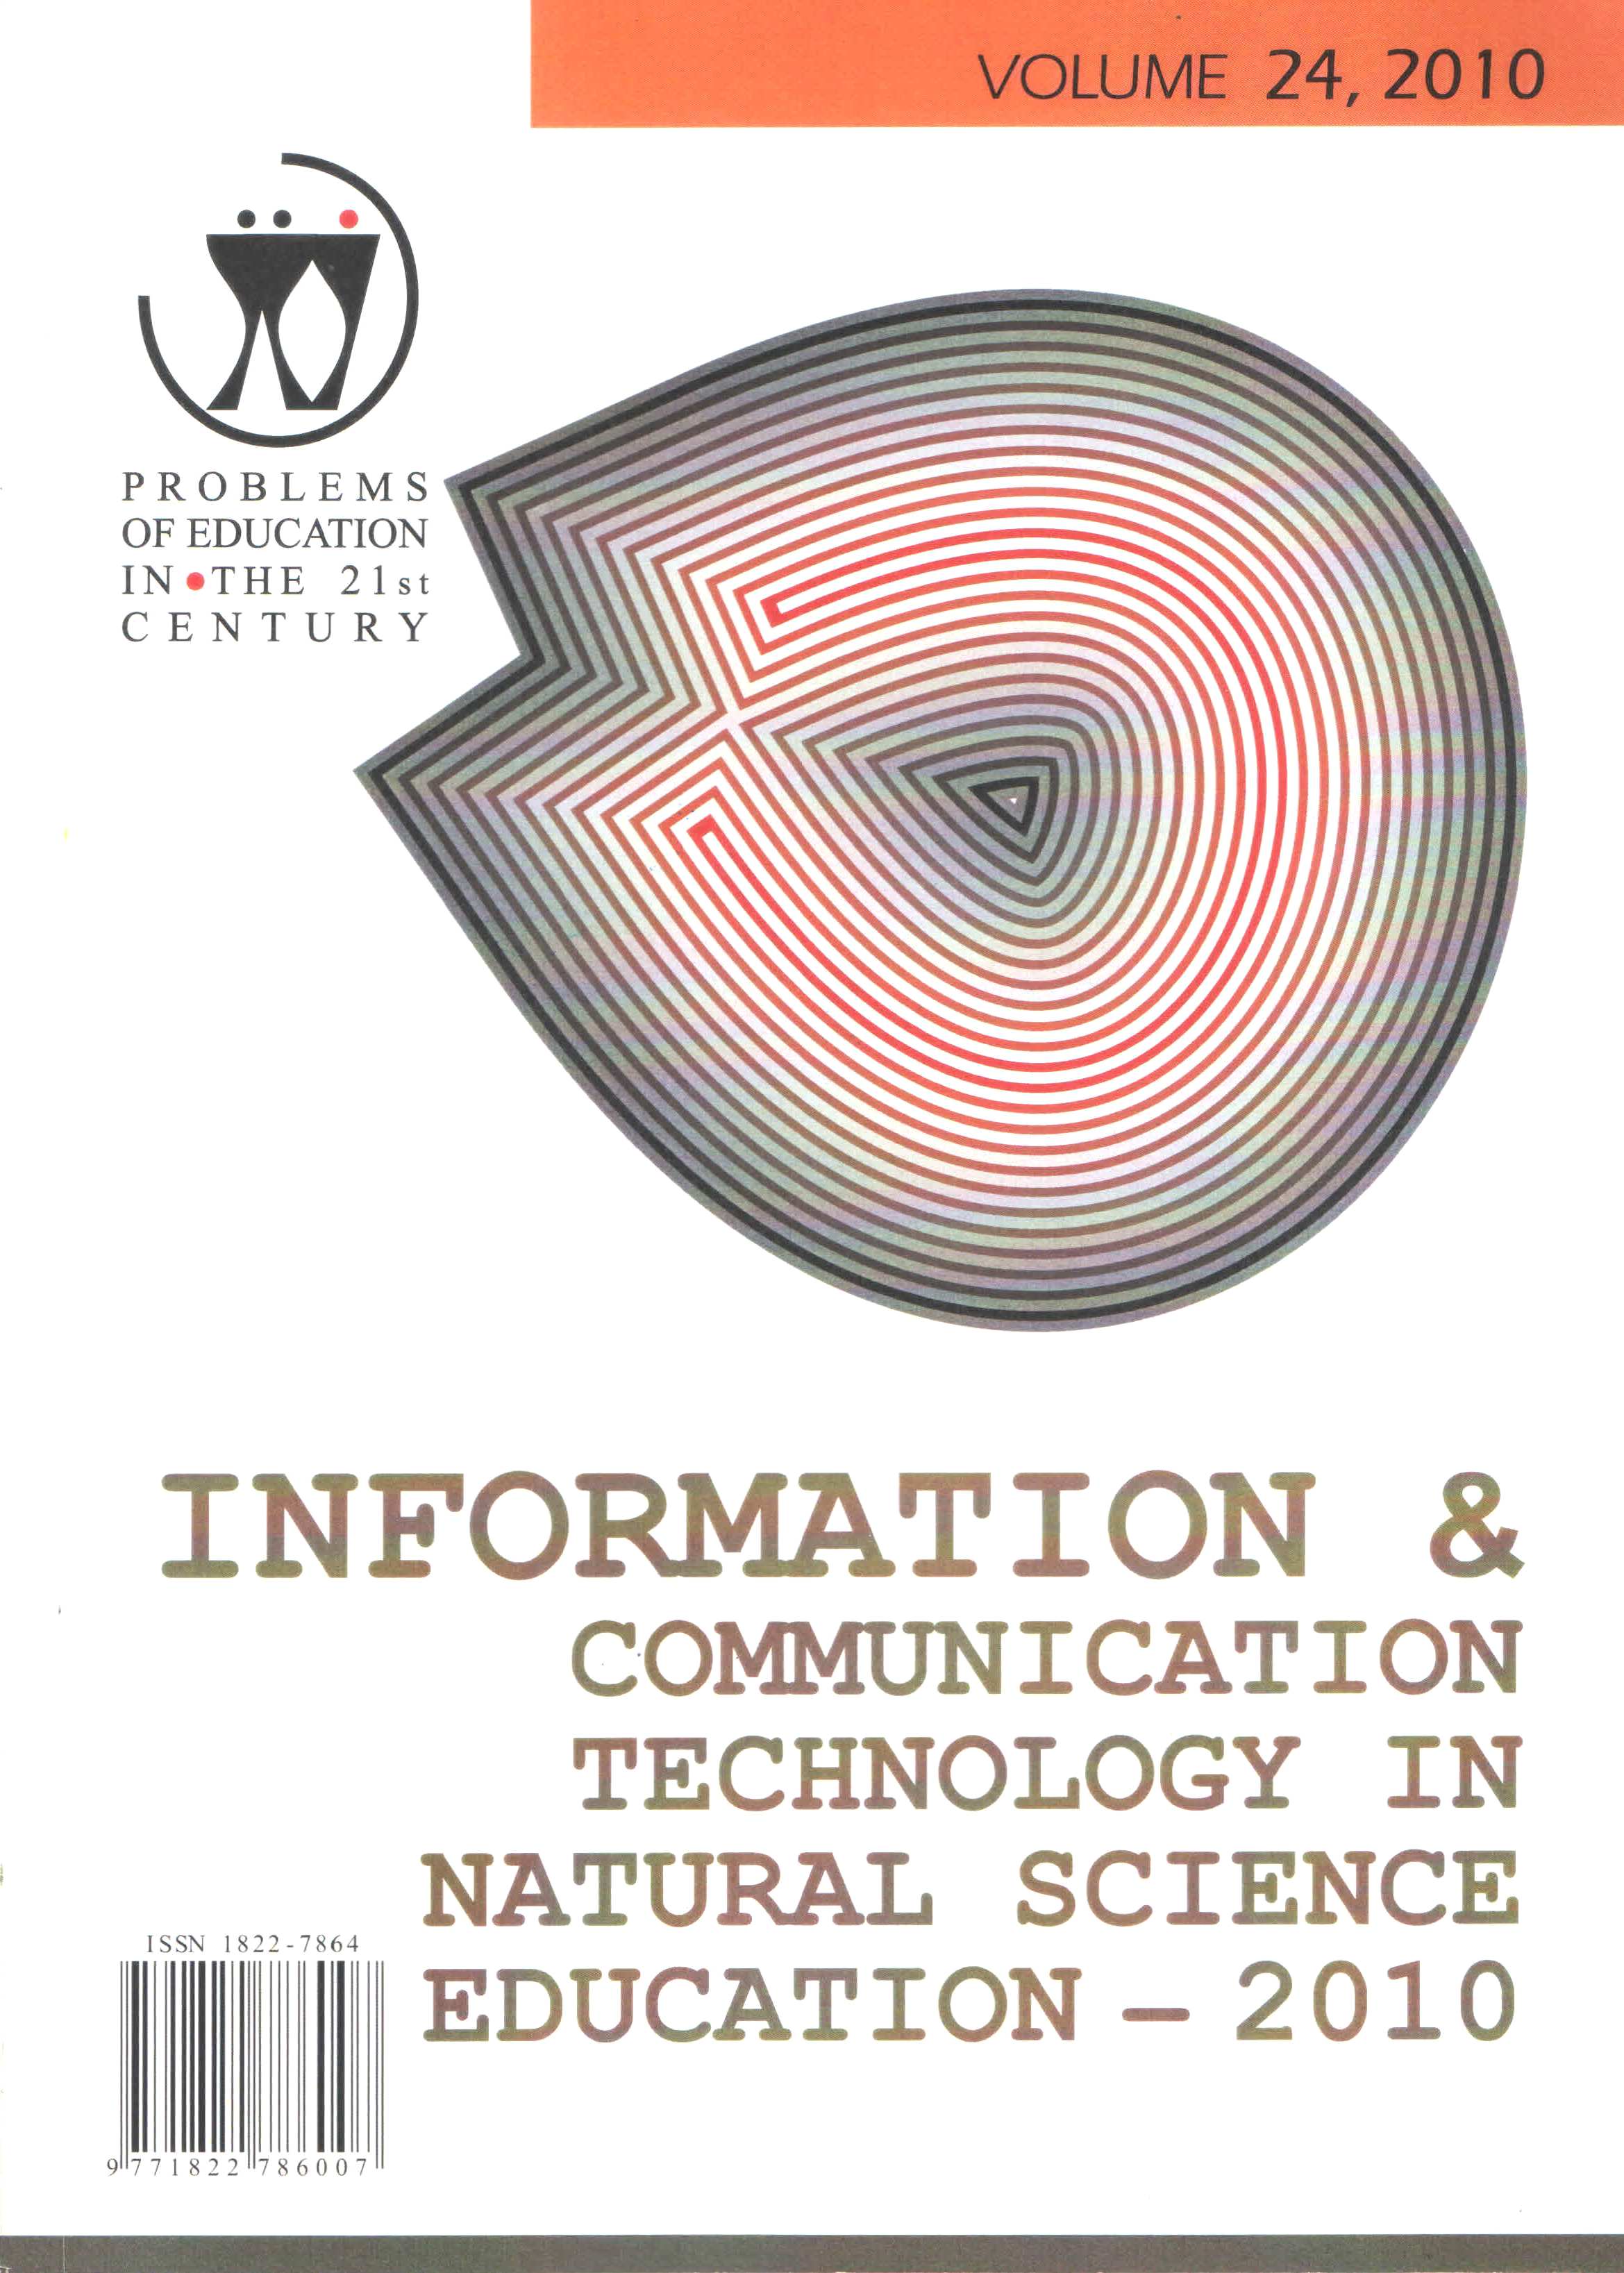 INFORMATION COMMUNICATION TECHNOLOGY AND E-LEARNING CONTRA TEACHER